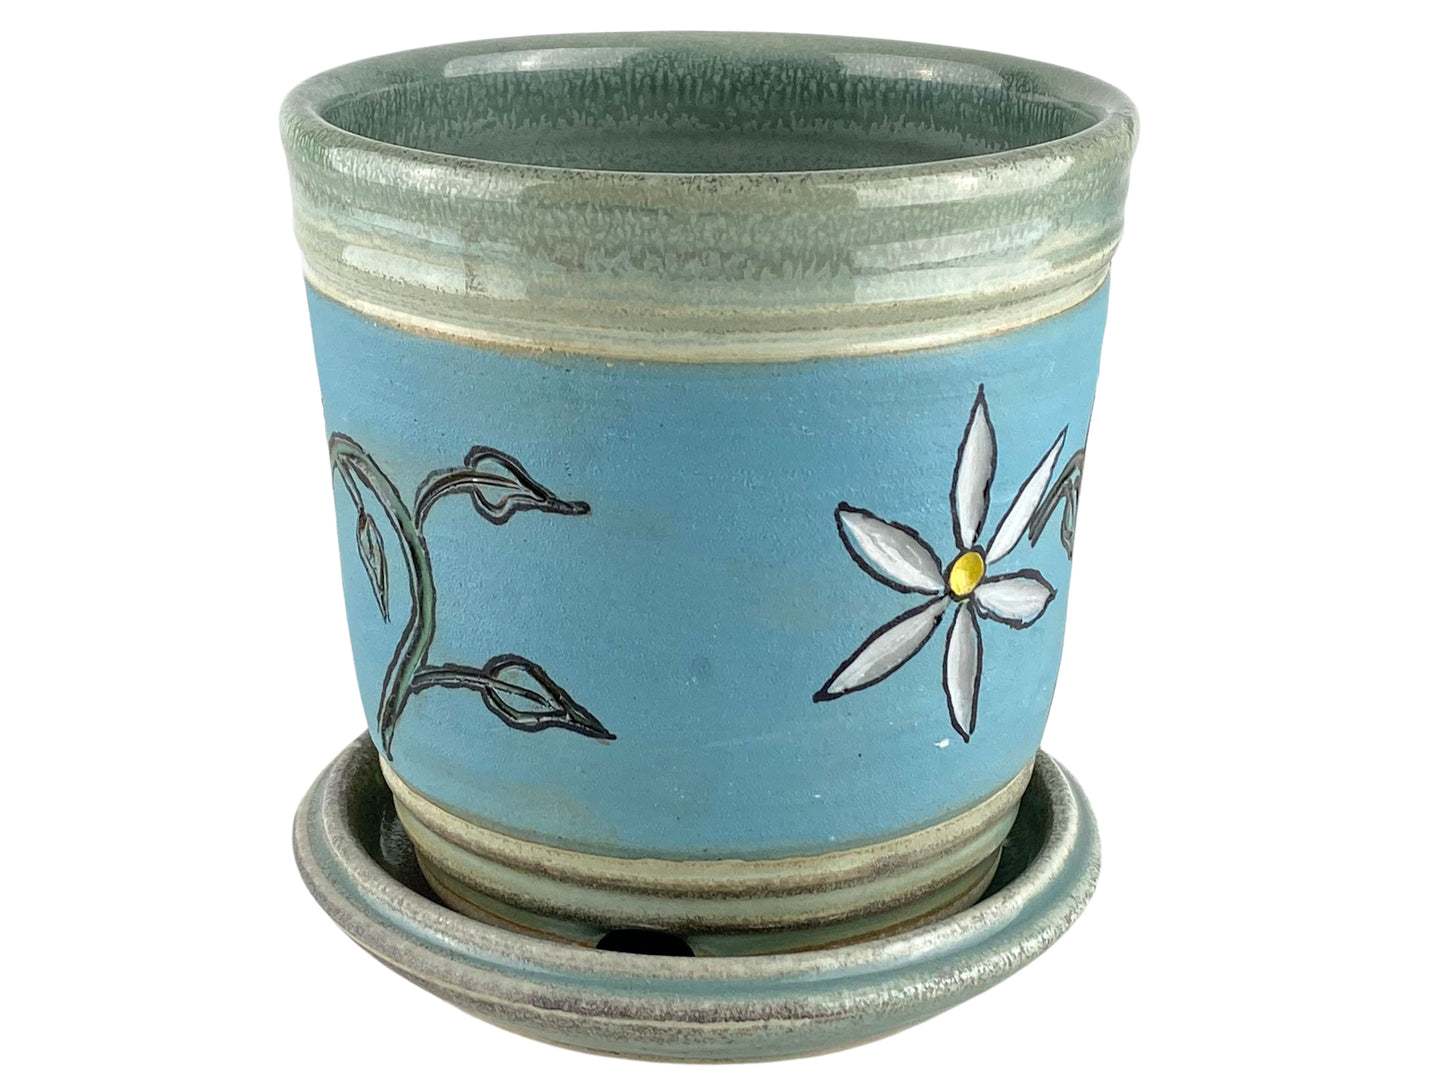 Stoneware Planter with Carved Flower Design